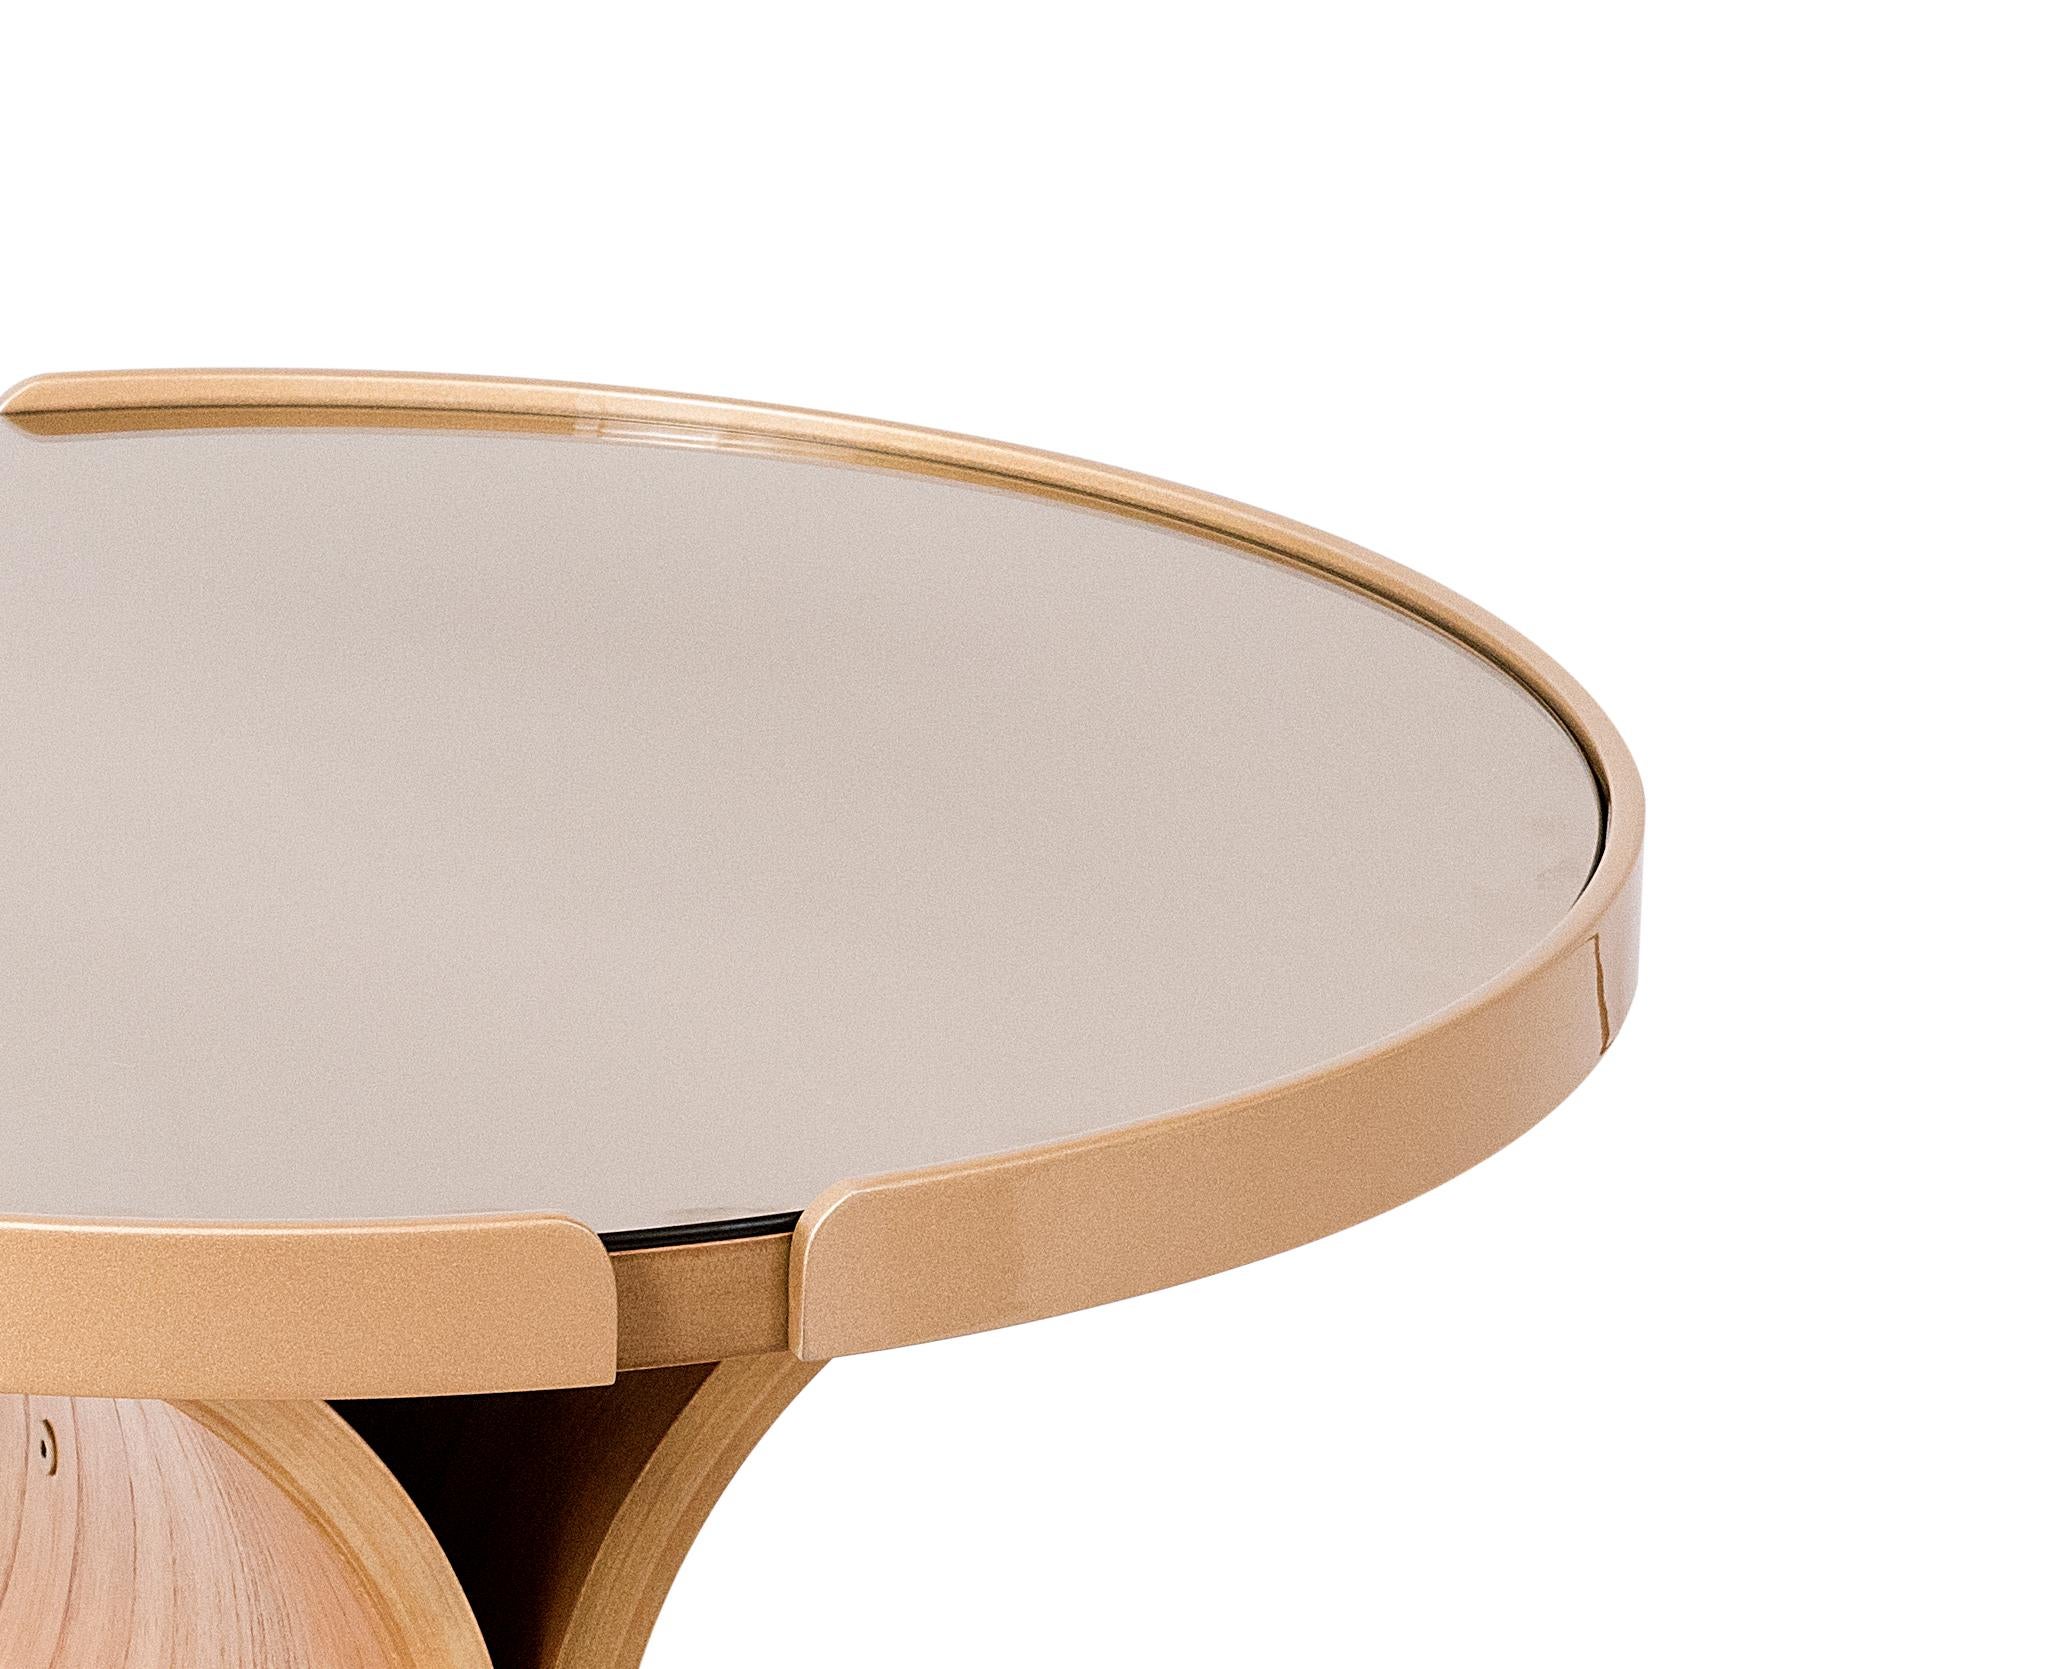 The Regia center table has a base made of a curved cinnamon natural wood multi-laminate. (20mm thick)
The top is made of MDF with wood laminate, and there is a mirror in bronze color. In the top edges there are two semi circles made of carbon steel